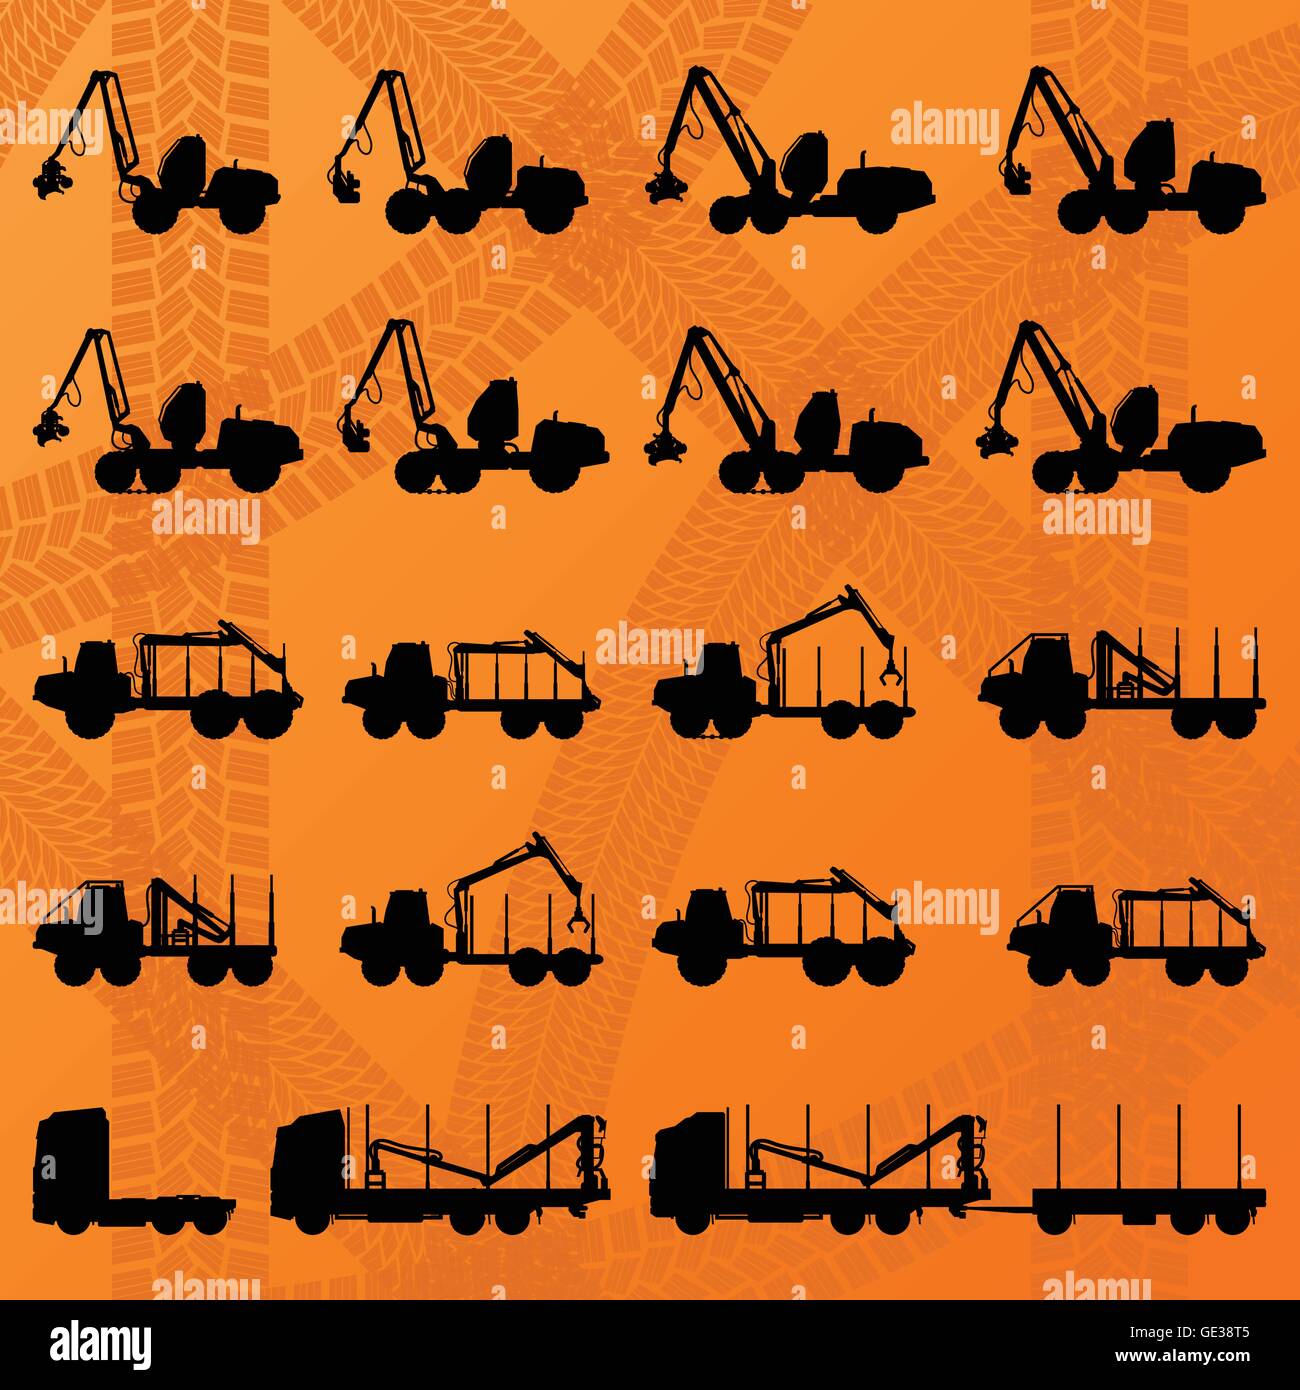 Forestry tractors, trucks and loggers hydraulic machinery detailed editable silhouettes illustration collection background vecto Stock Vector